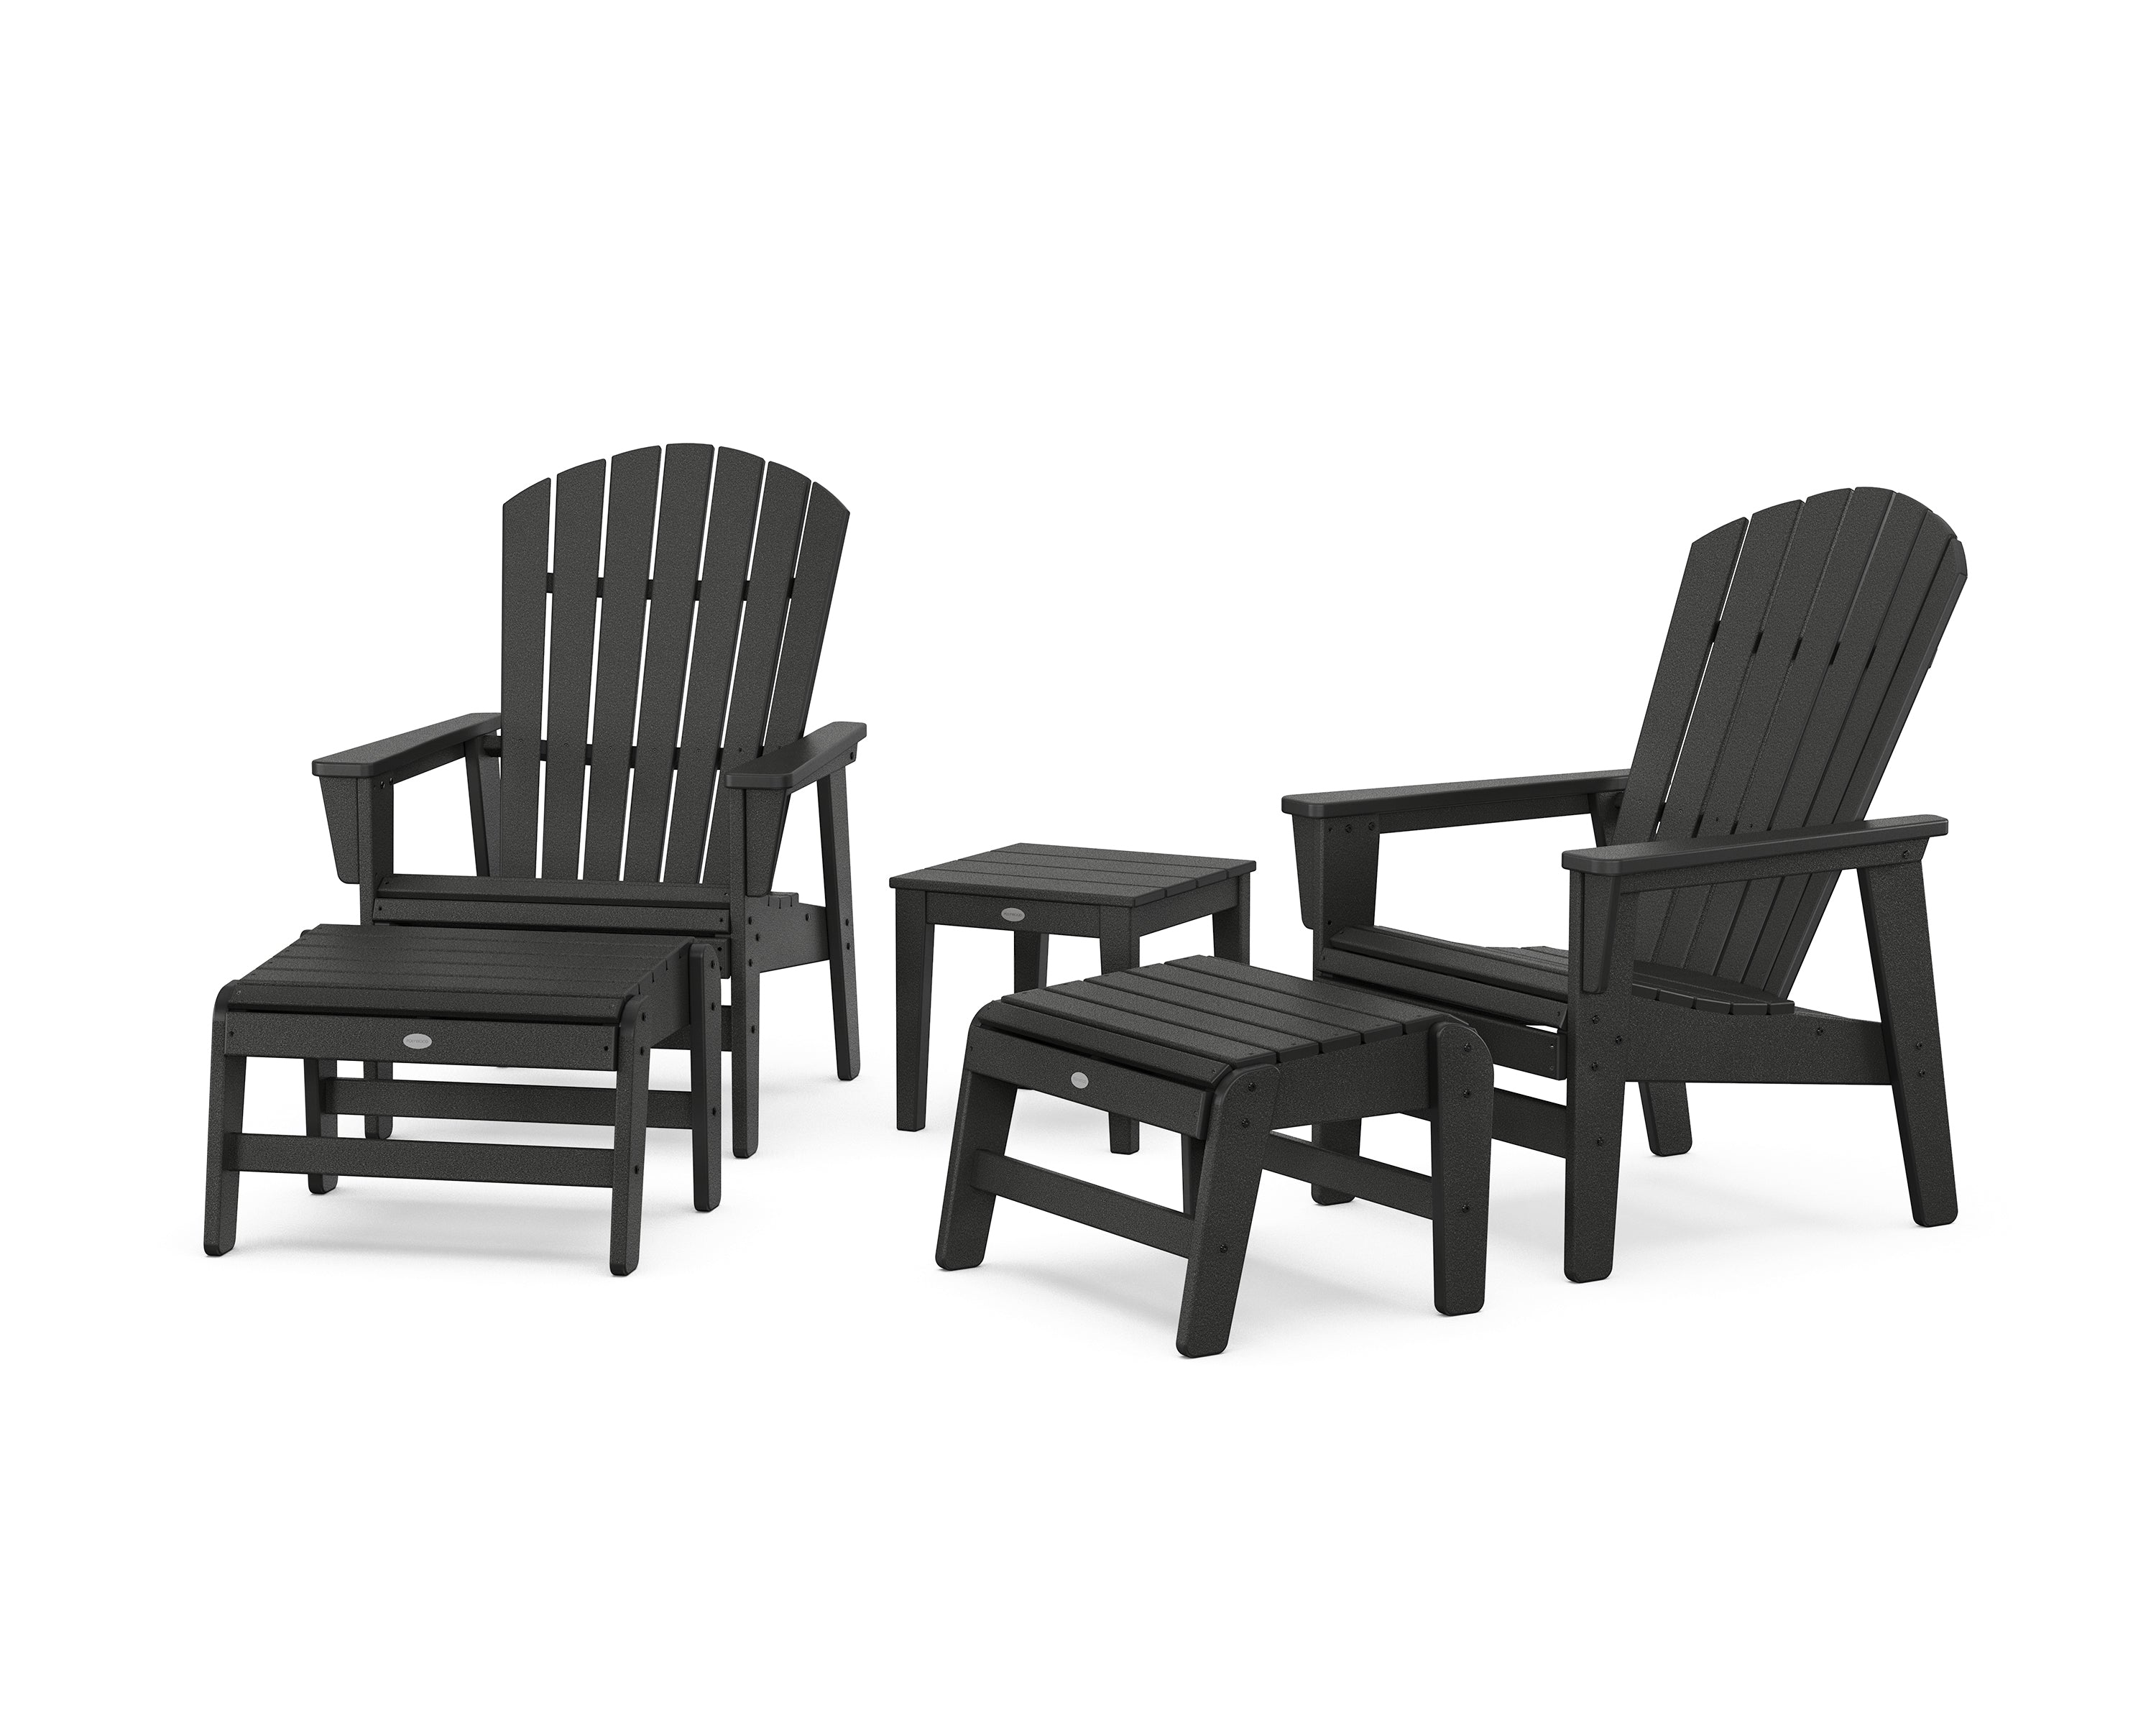 POLYWOOD® 5-Piece Nautical Grand Upright Adirondack Set with Ottomans and Side Table in Black